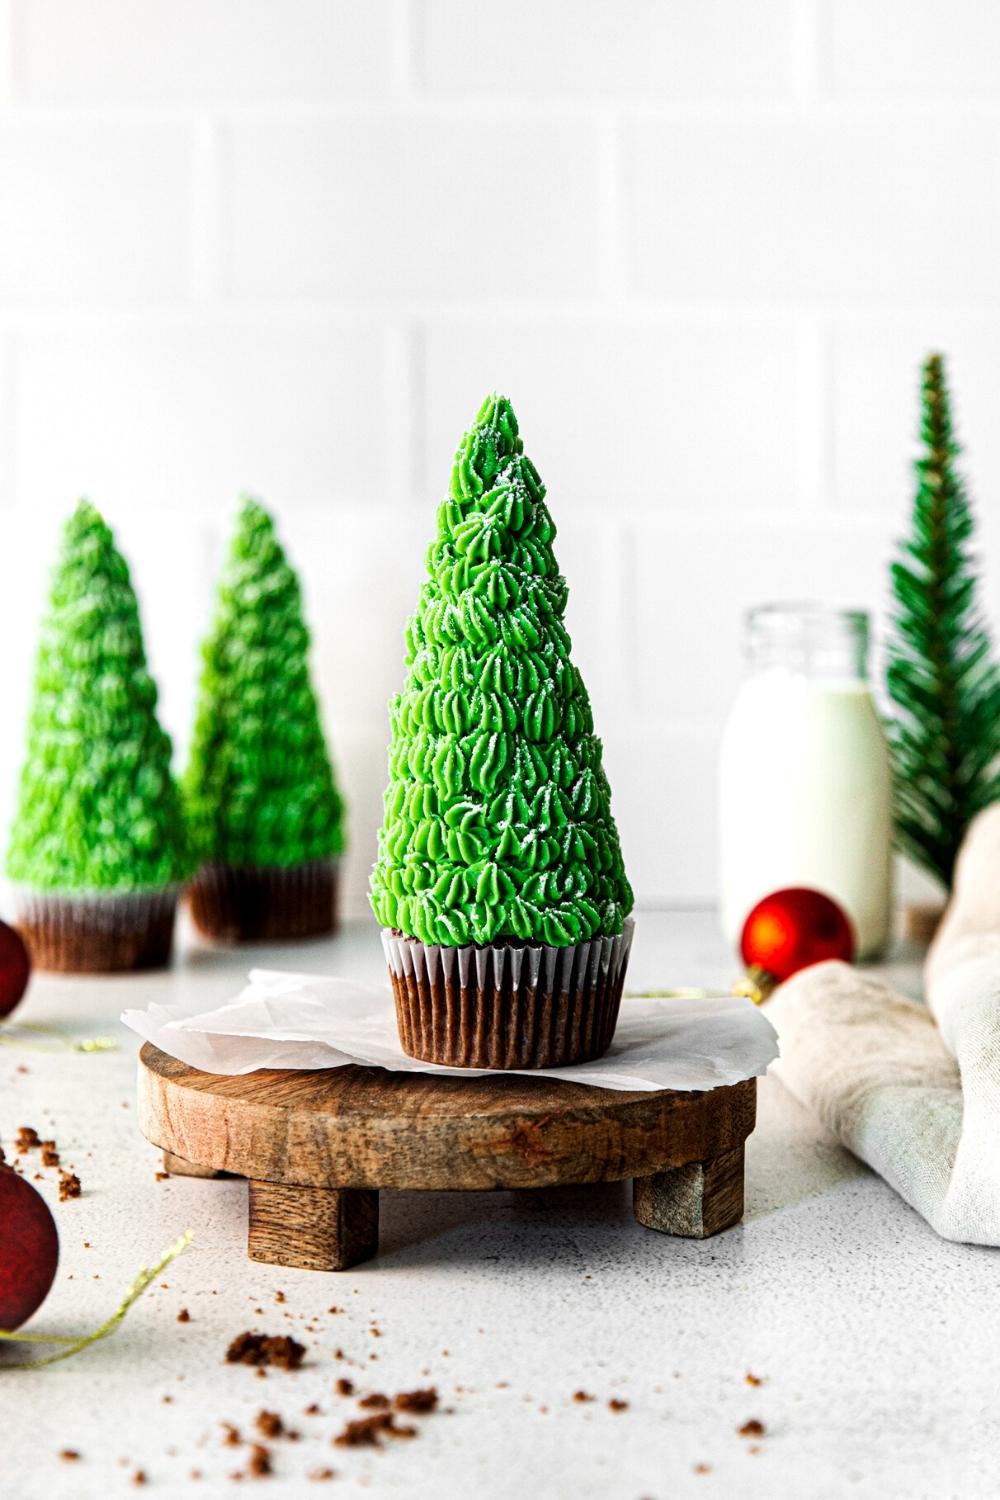 Christmas tree cupcakes on a holiday dessert table with milk.